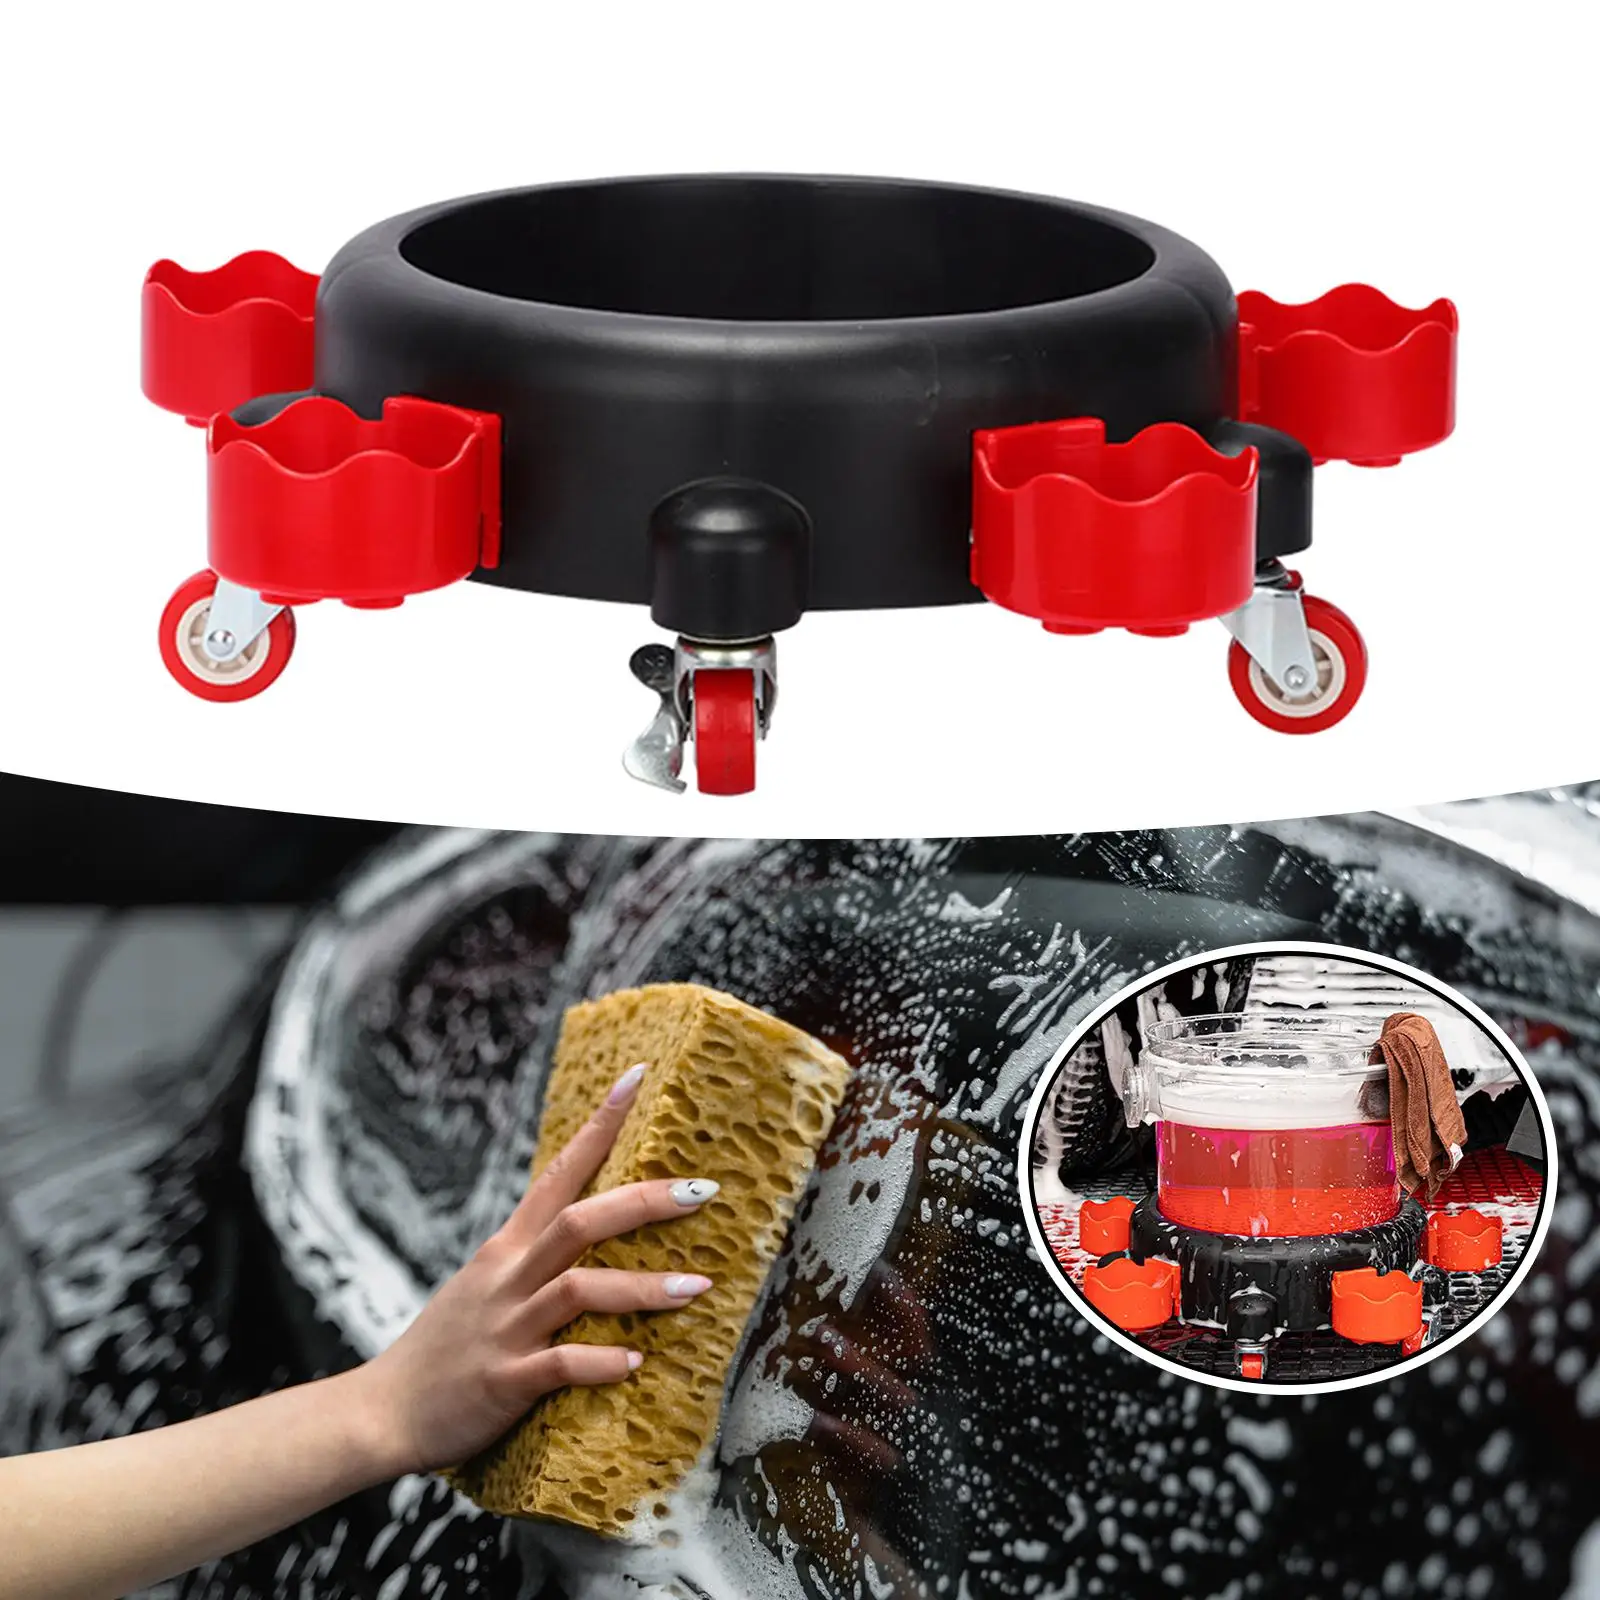 Bucket Dolly Convenient Roll Swivel Casters to Move Car Wash Bucket Insert for Car Washing Detailing Painting Assistance